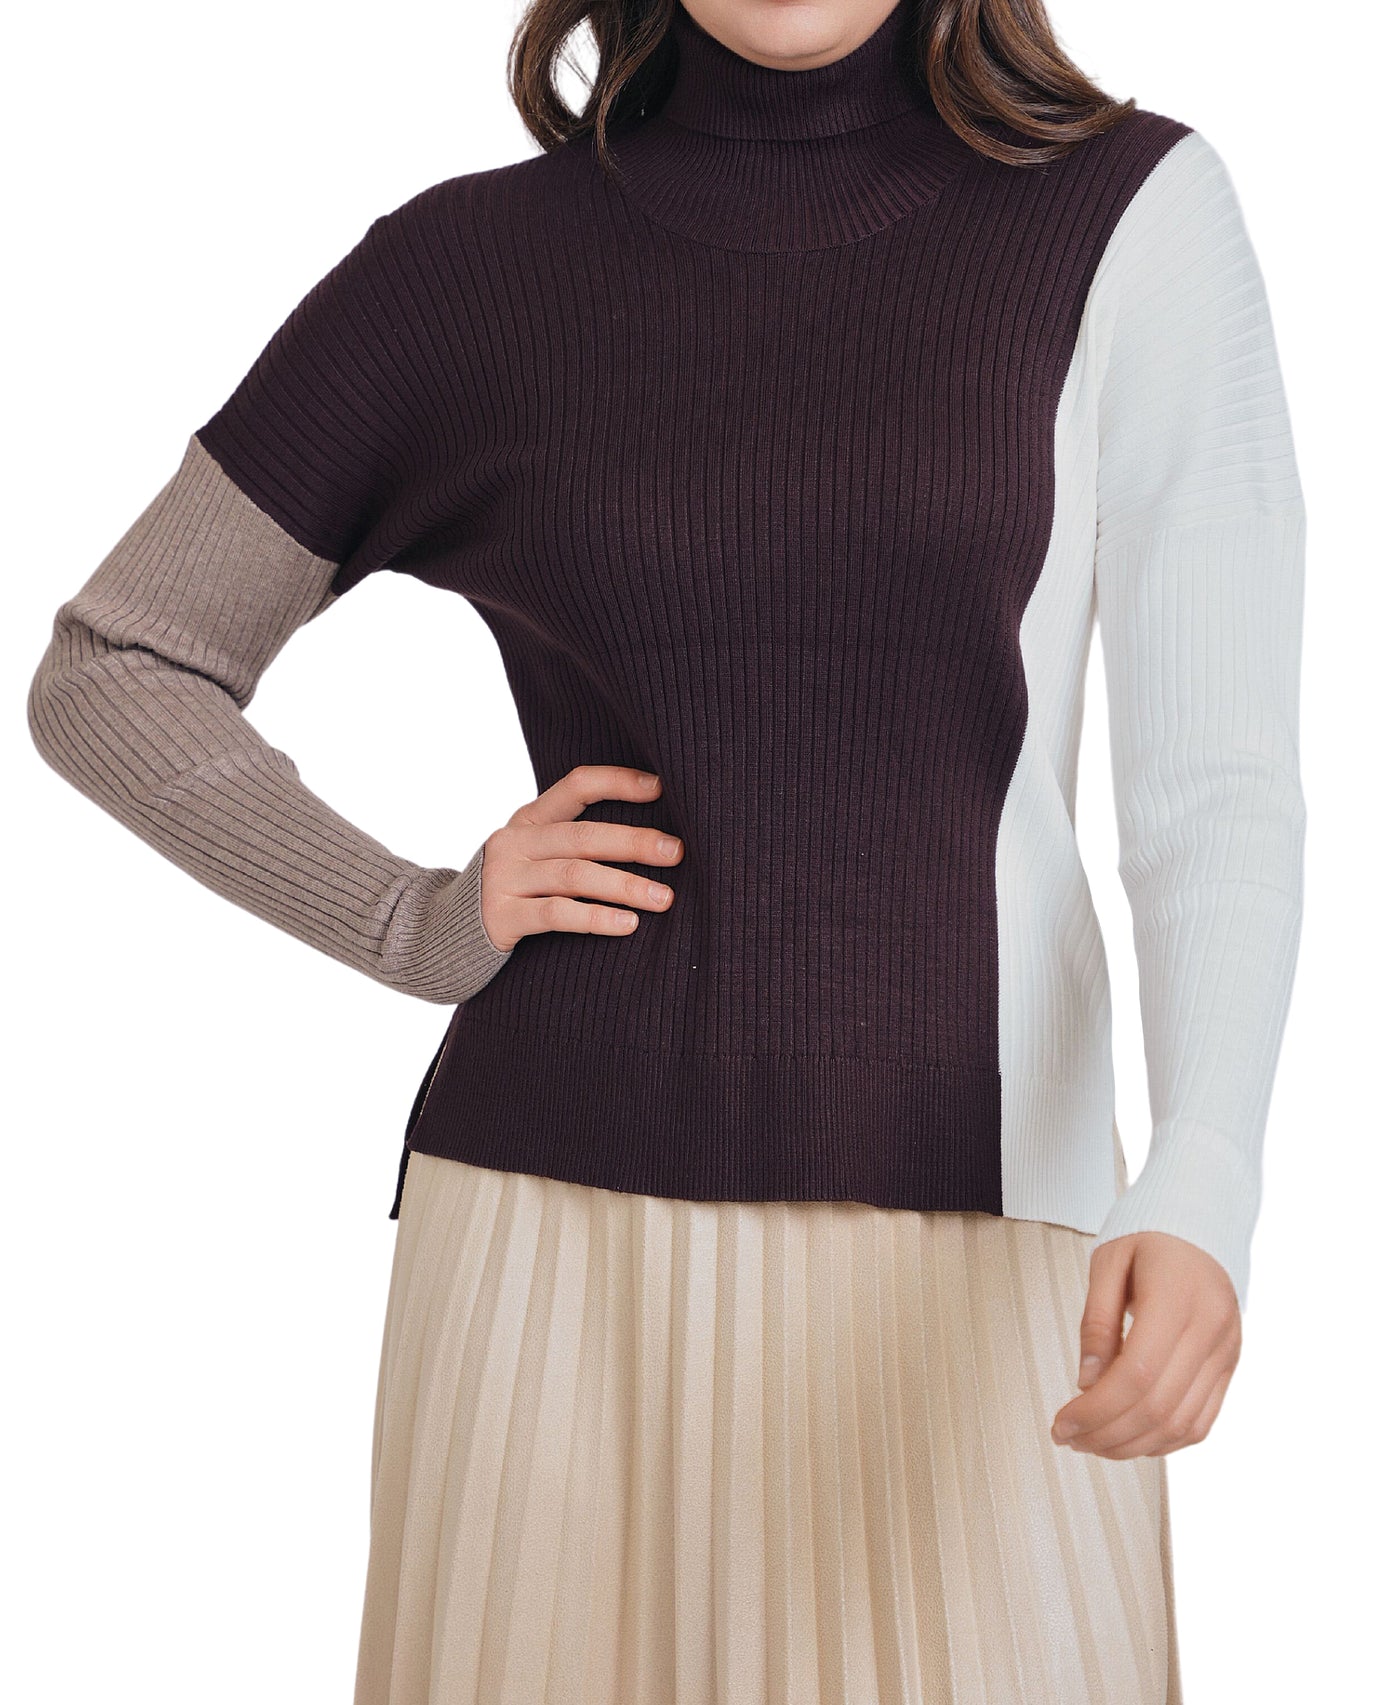 Ribbed Colorblock Sweater image 1